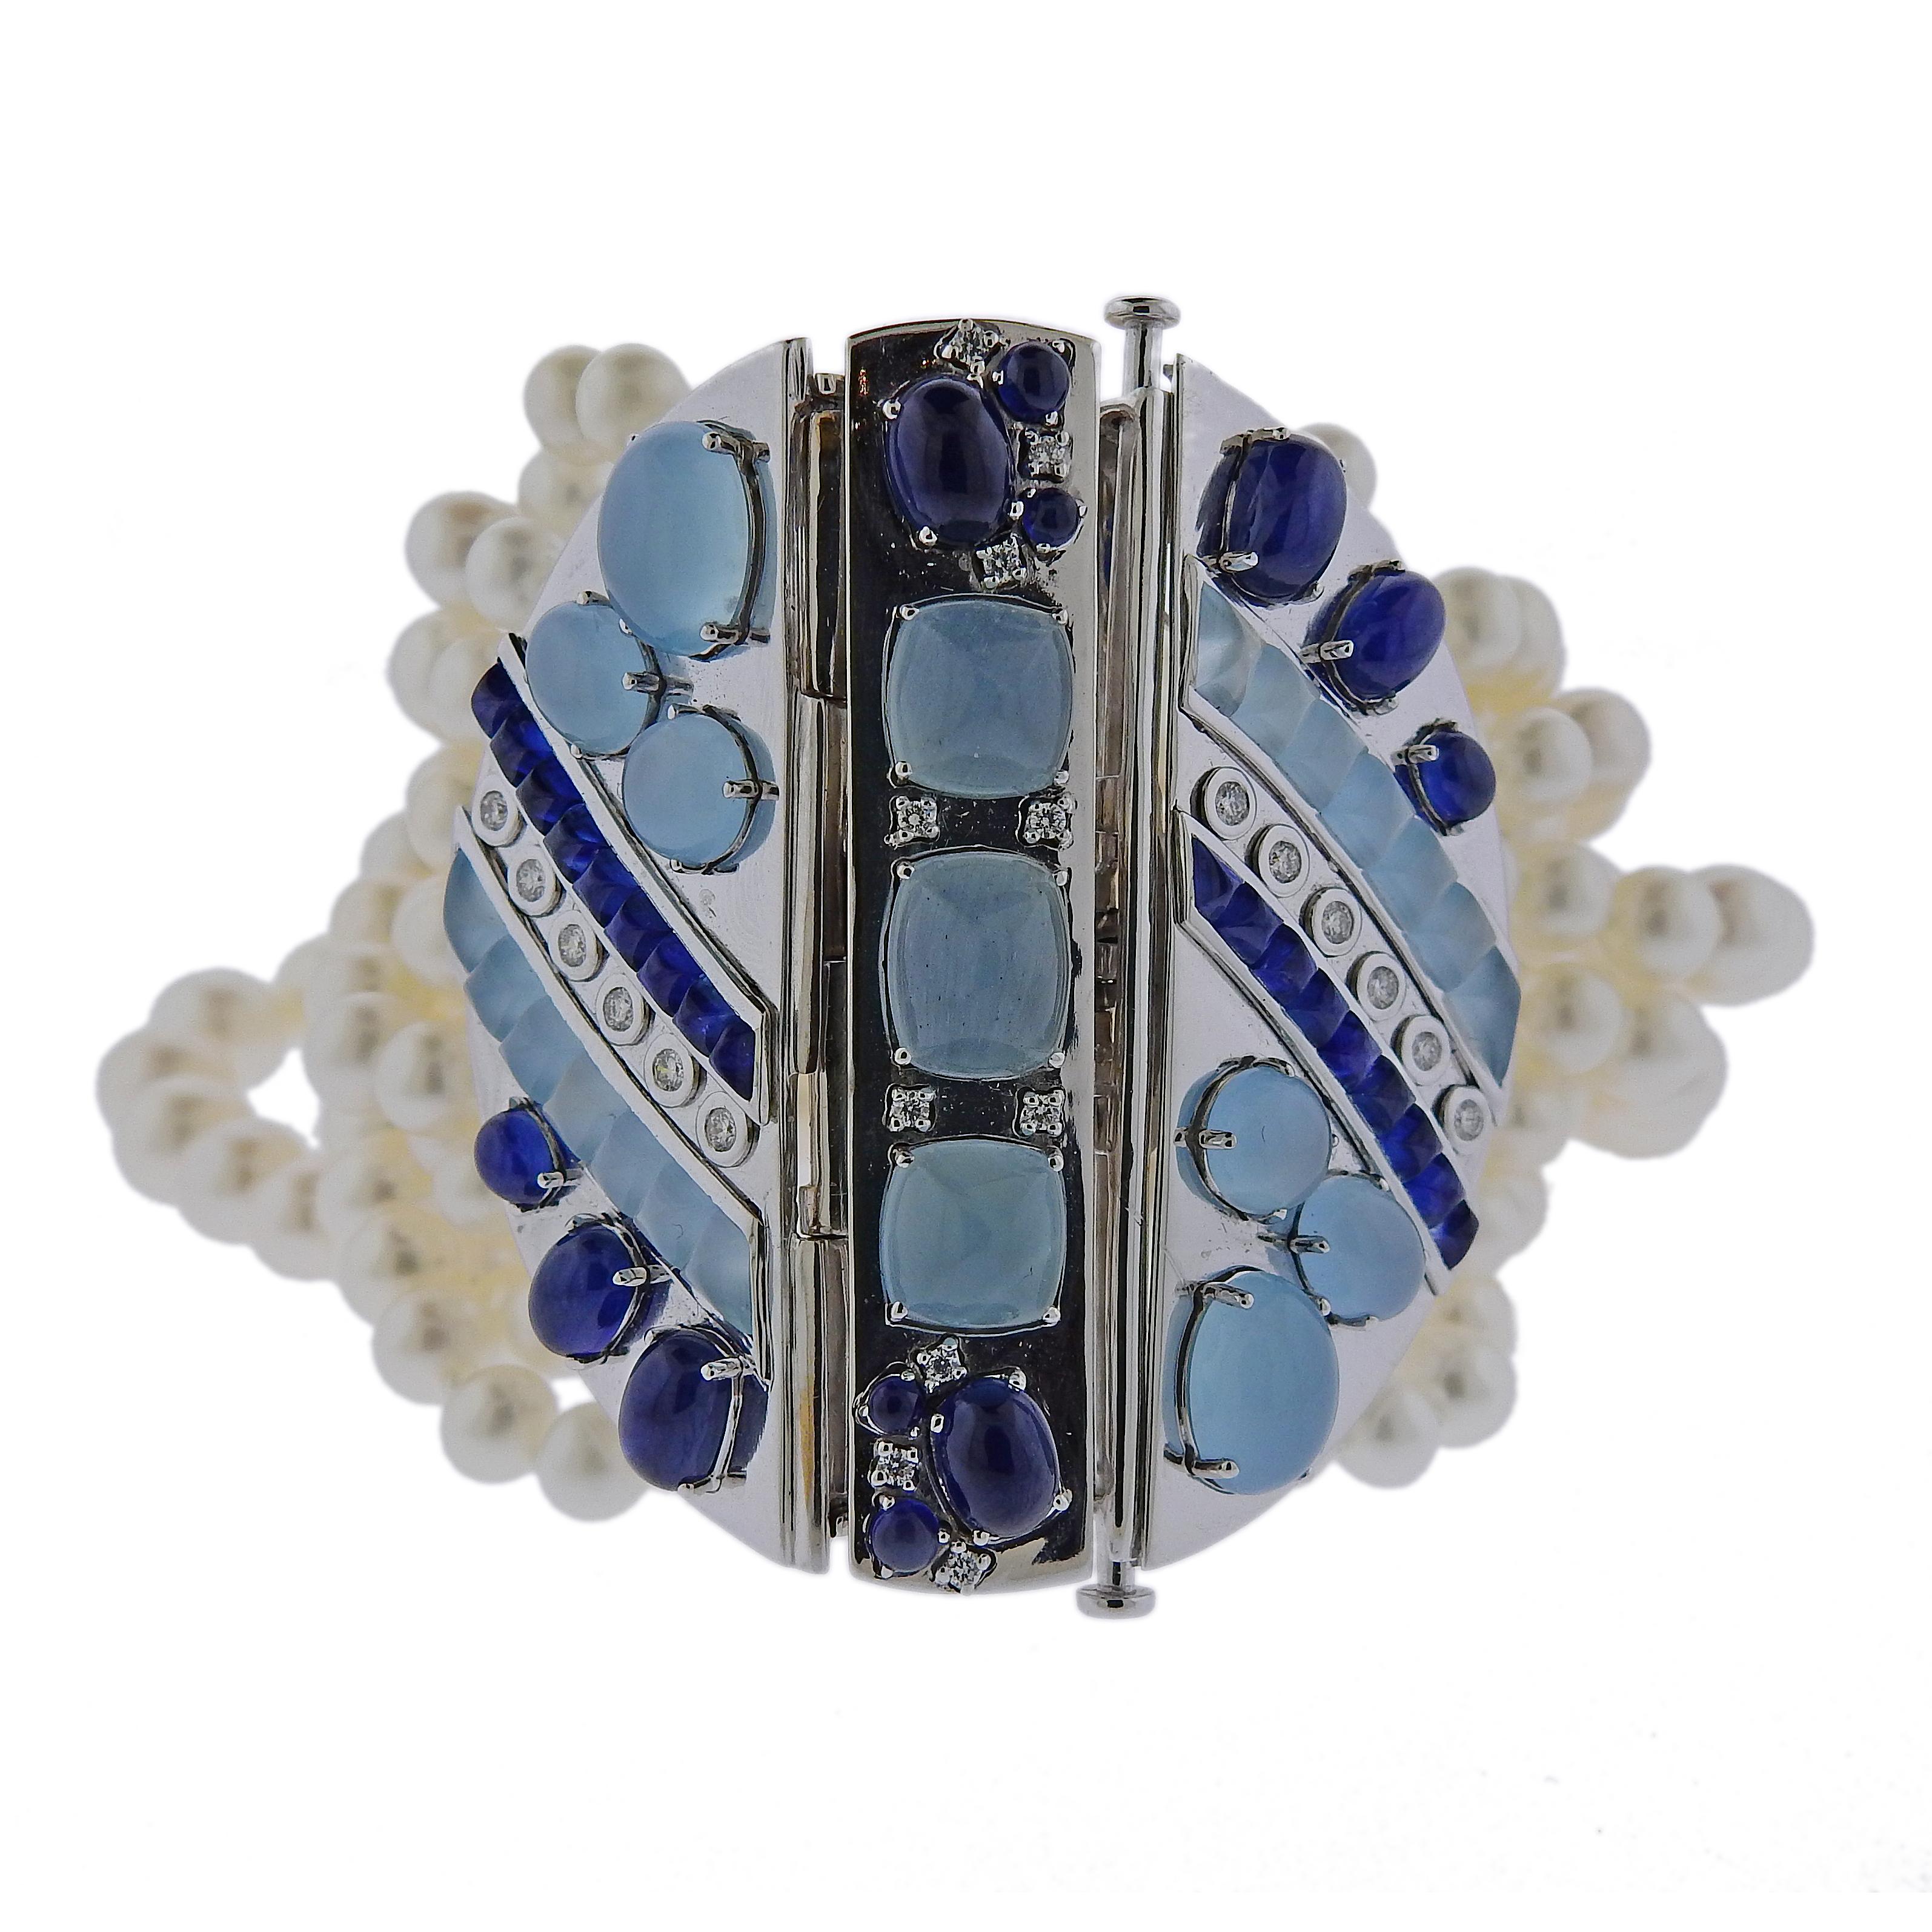 Impressive multi strand bracelet by Seaman Schepps, featuring 5.3-9mm pearls, aquamarines, sapphires, and approx. 0.46ctw in G/VS diamonds. Retail $50,400.00. Bracelet is 7.5